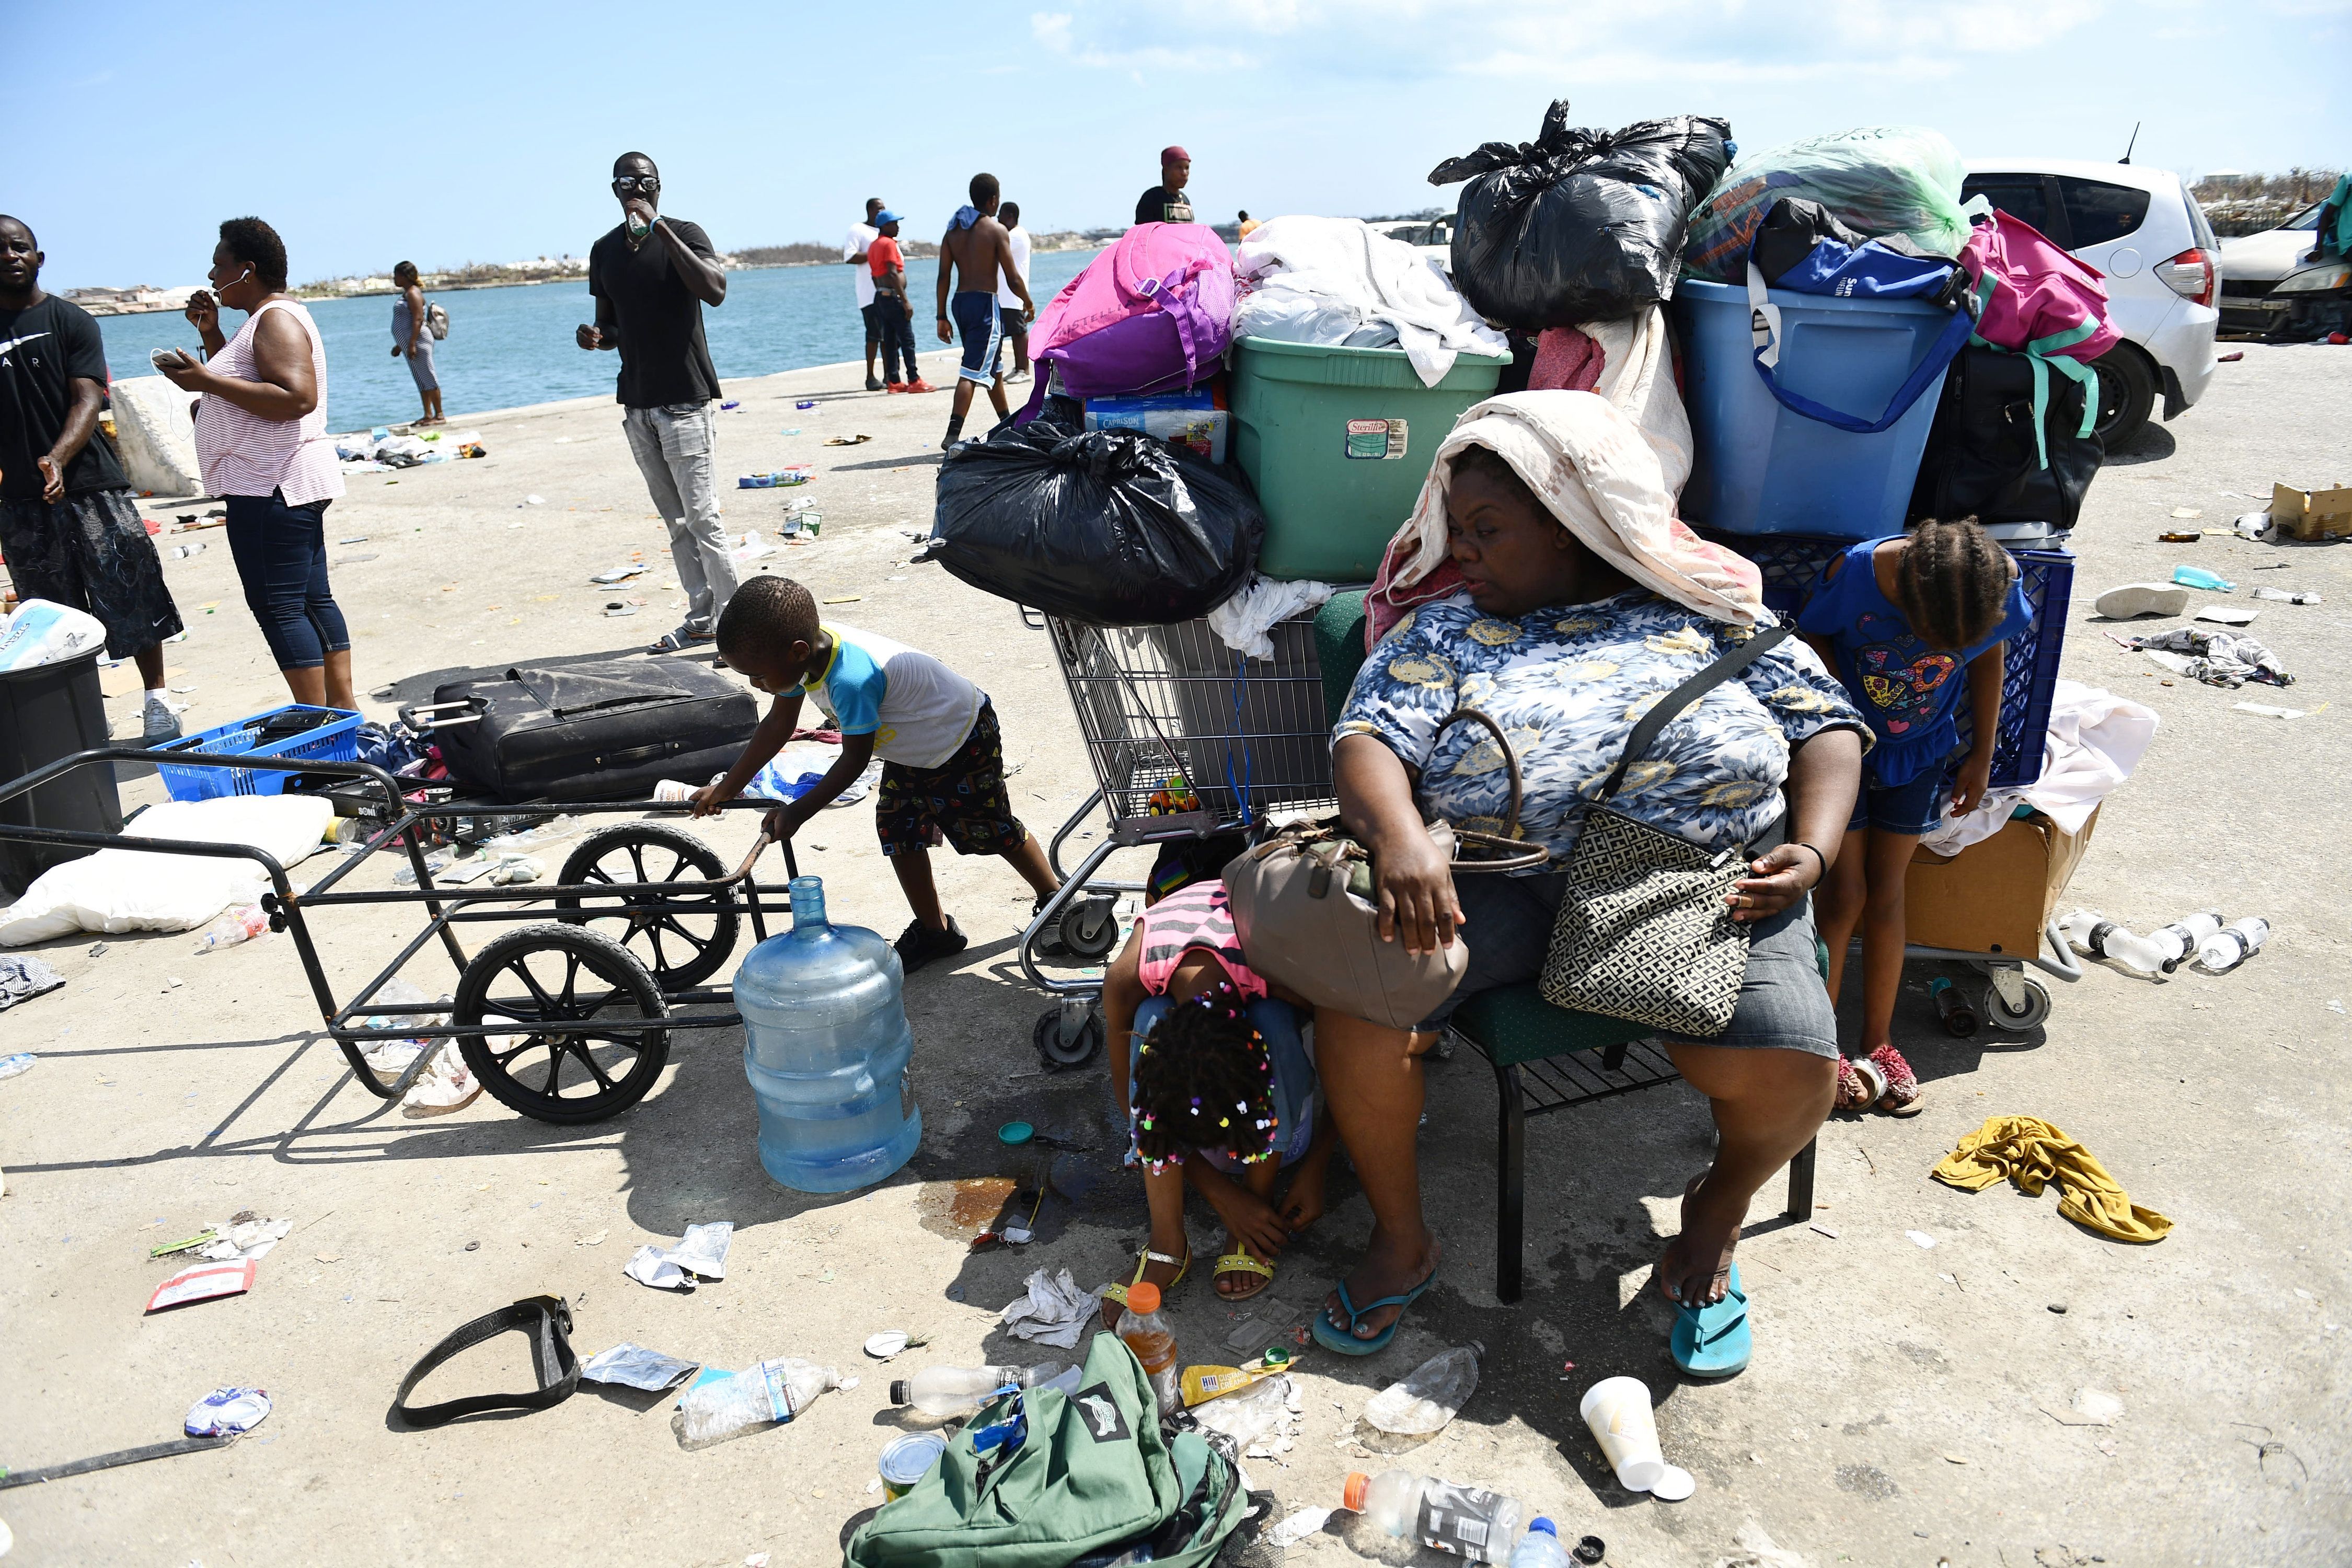 Christine Joseph and others await evacuation at a dock in Marsh Harbour, Bahamas, on September 7